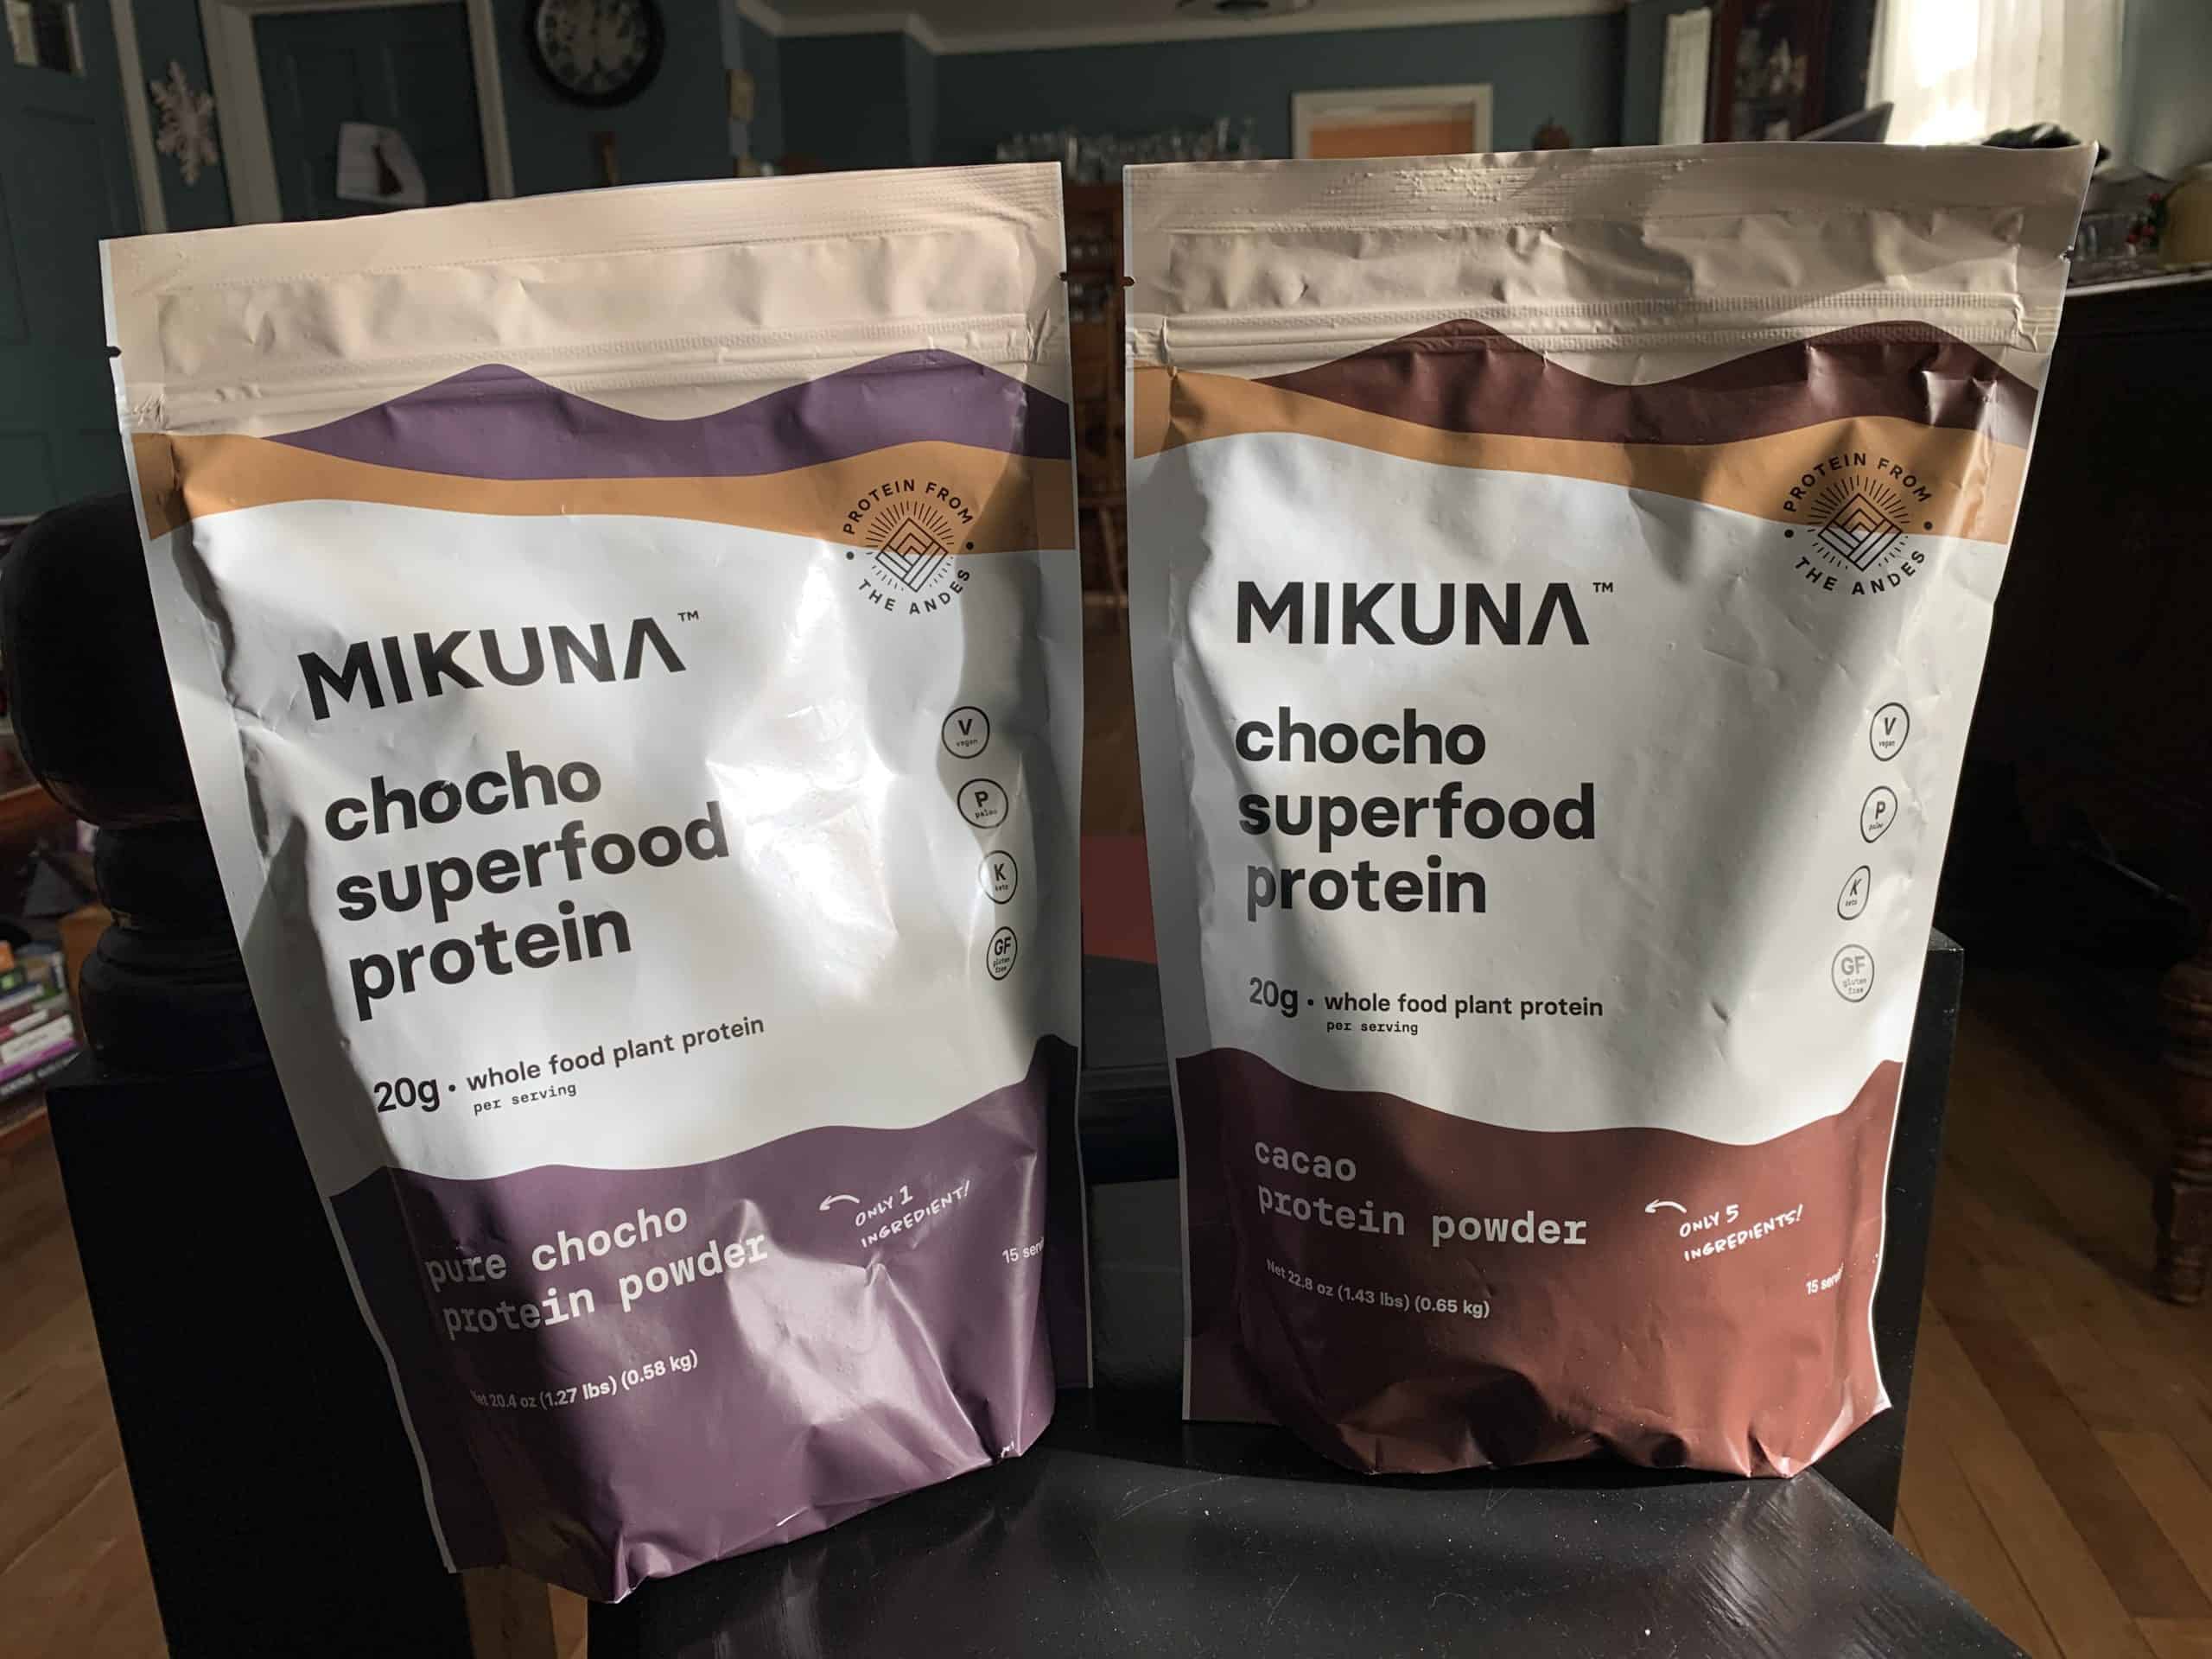 things to make your life easier in 2022 - mikuna choco superfood